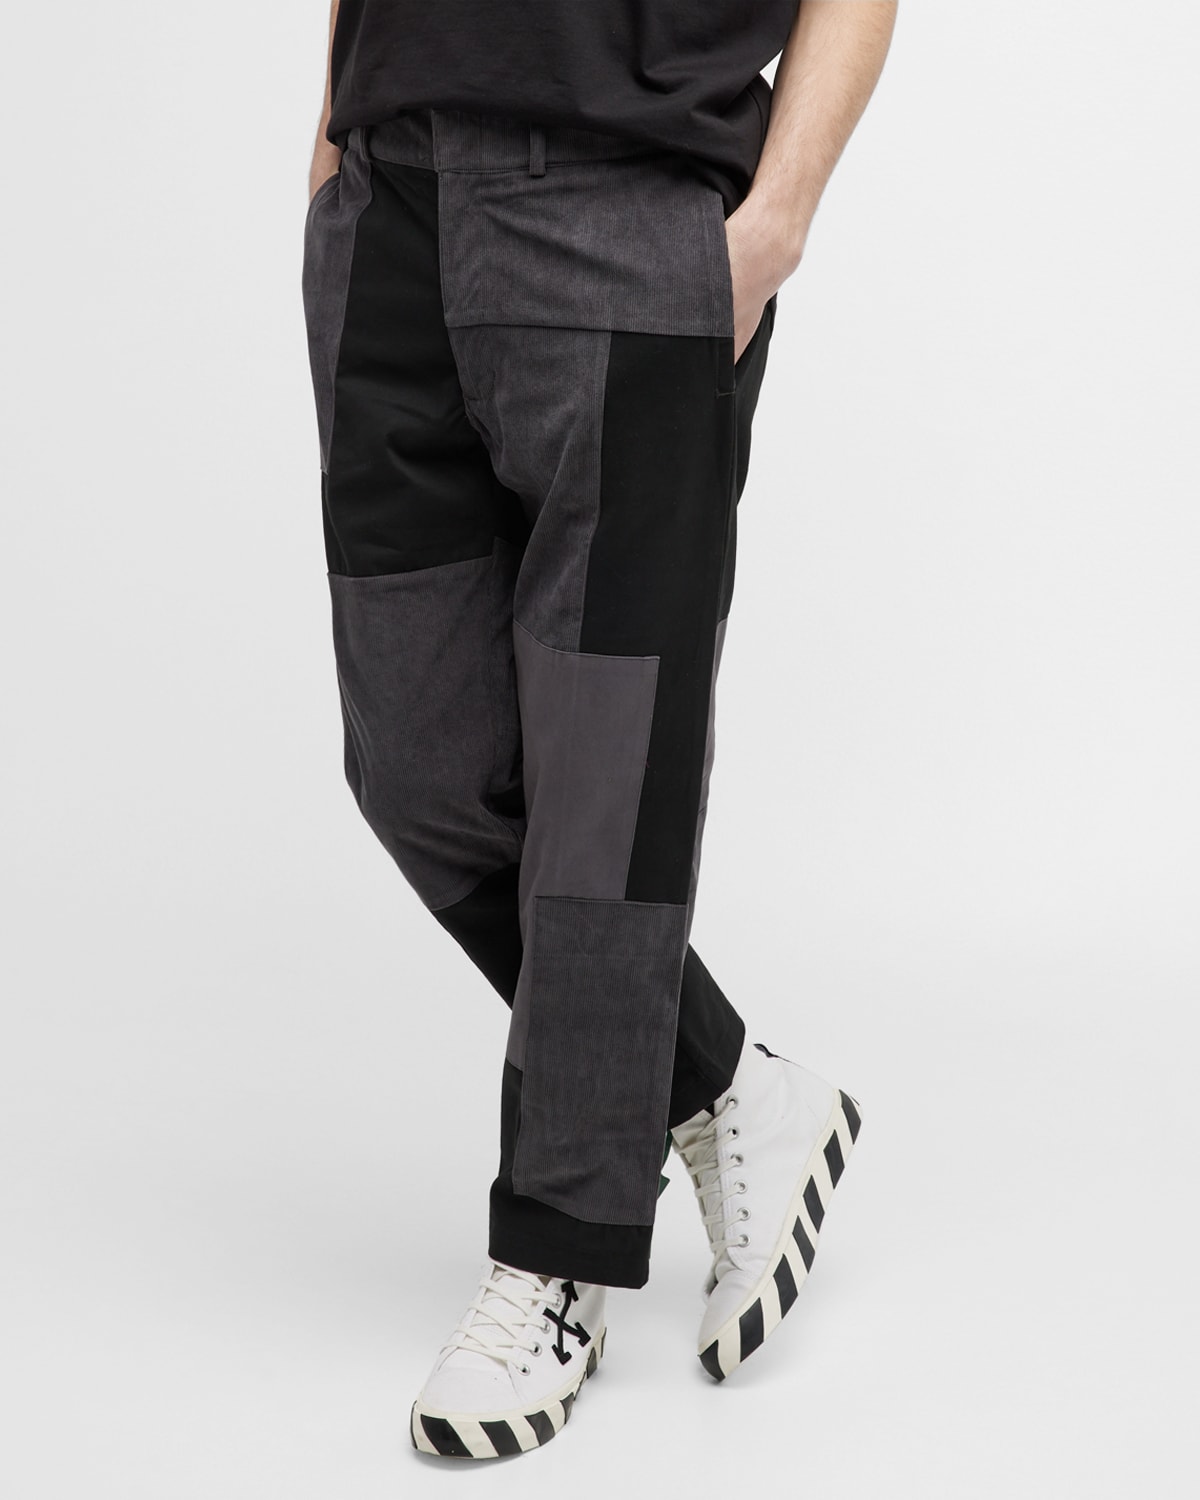 Lotto Italia Men's Patchwork Canvas And Corduroy Pants In Black